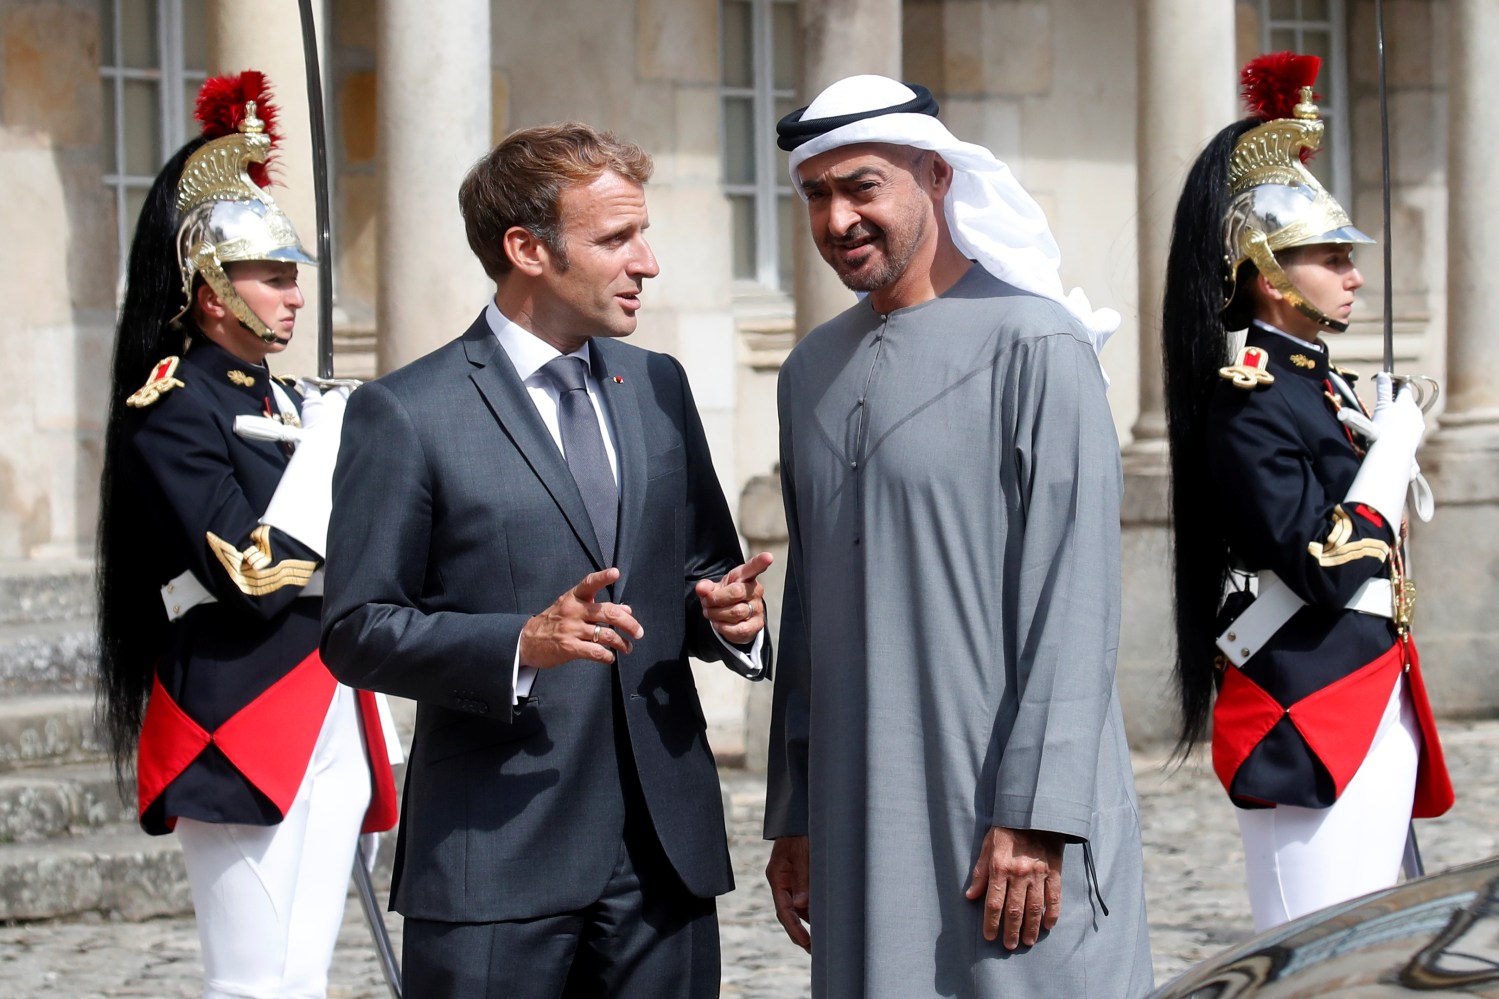 French President Emmanuel Macron welcomes Abu Dhabi's Crown Prince Sheikh Mohammed bin Zayed al-Nahyan for a working lunch at the Chateau de Fontainebleau in Fontainebleau near Paris, France, September 15, 2021. REUTERS/Gonzalo Fuentes